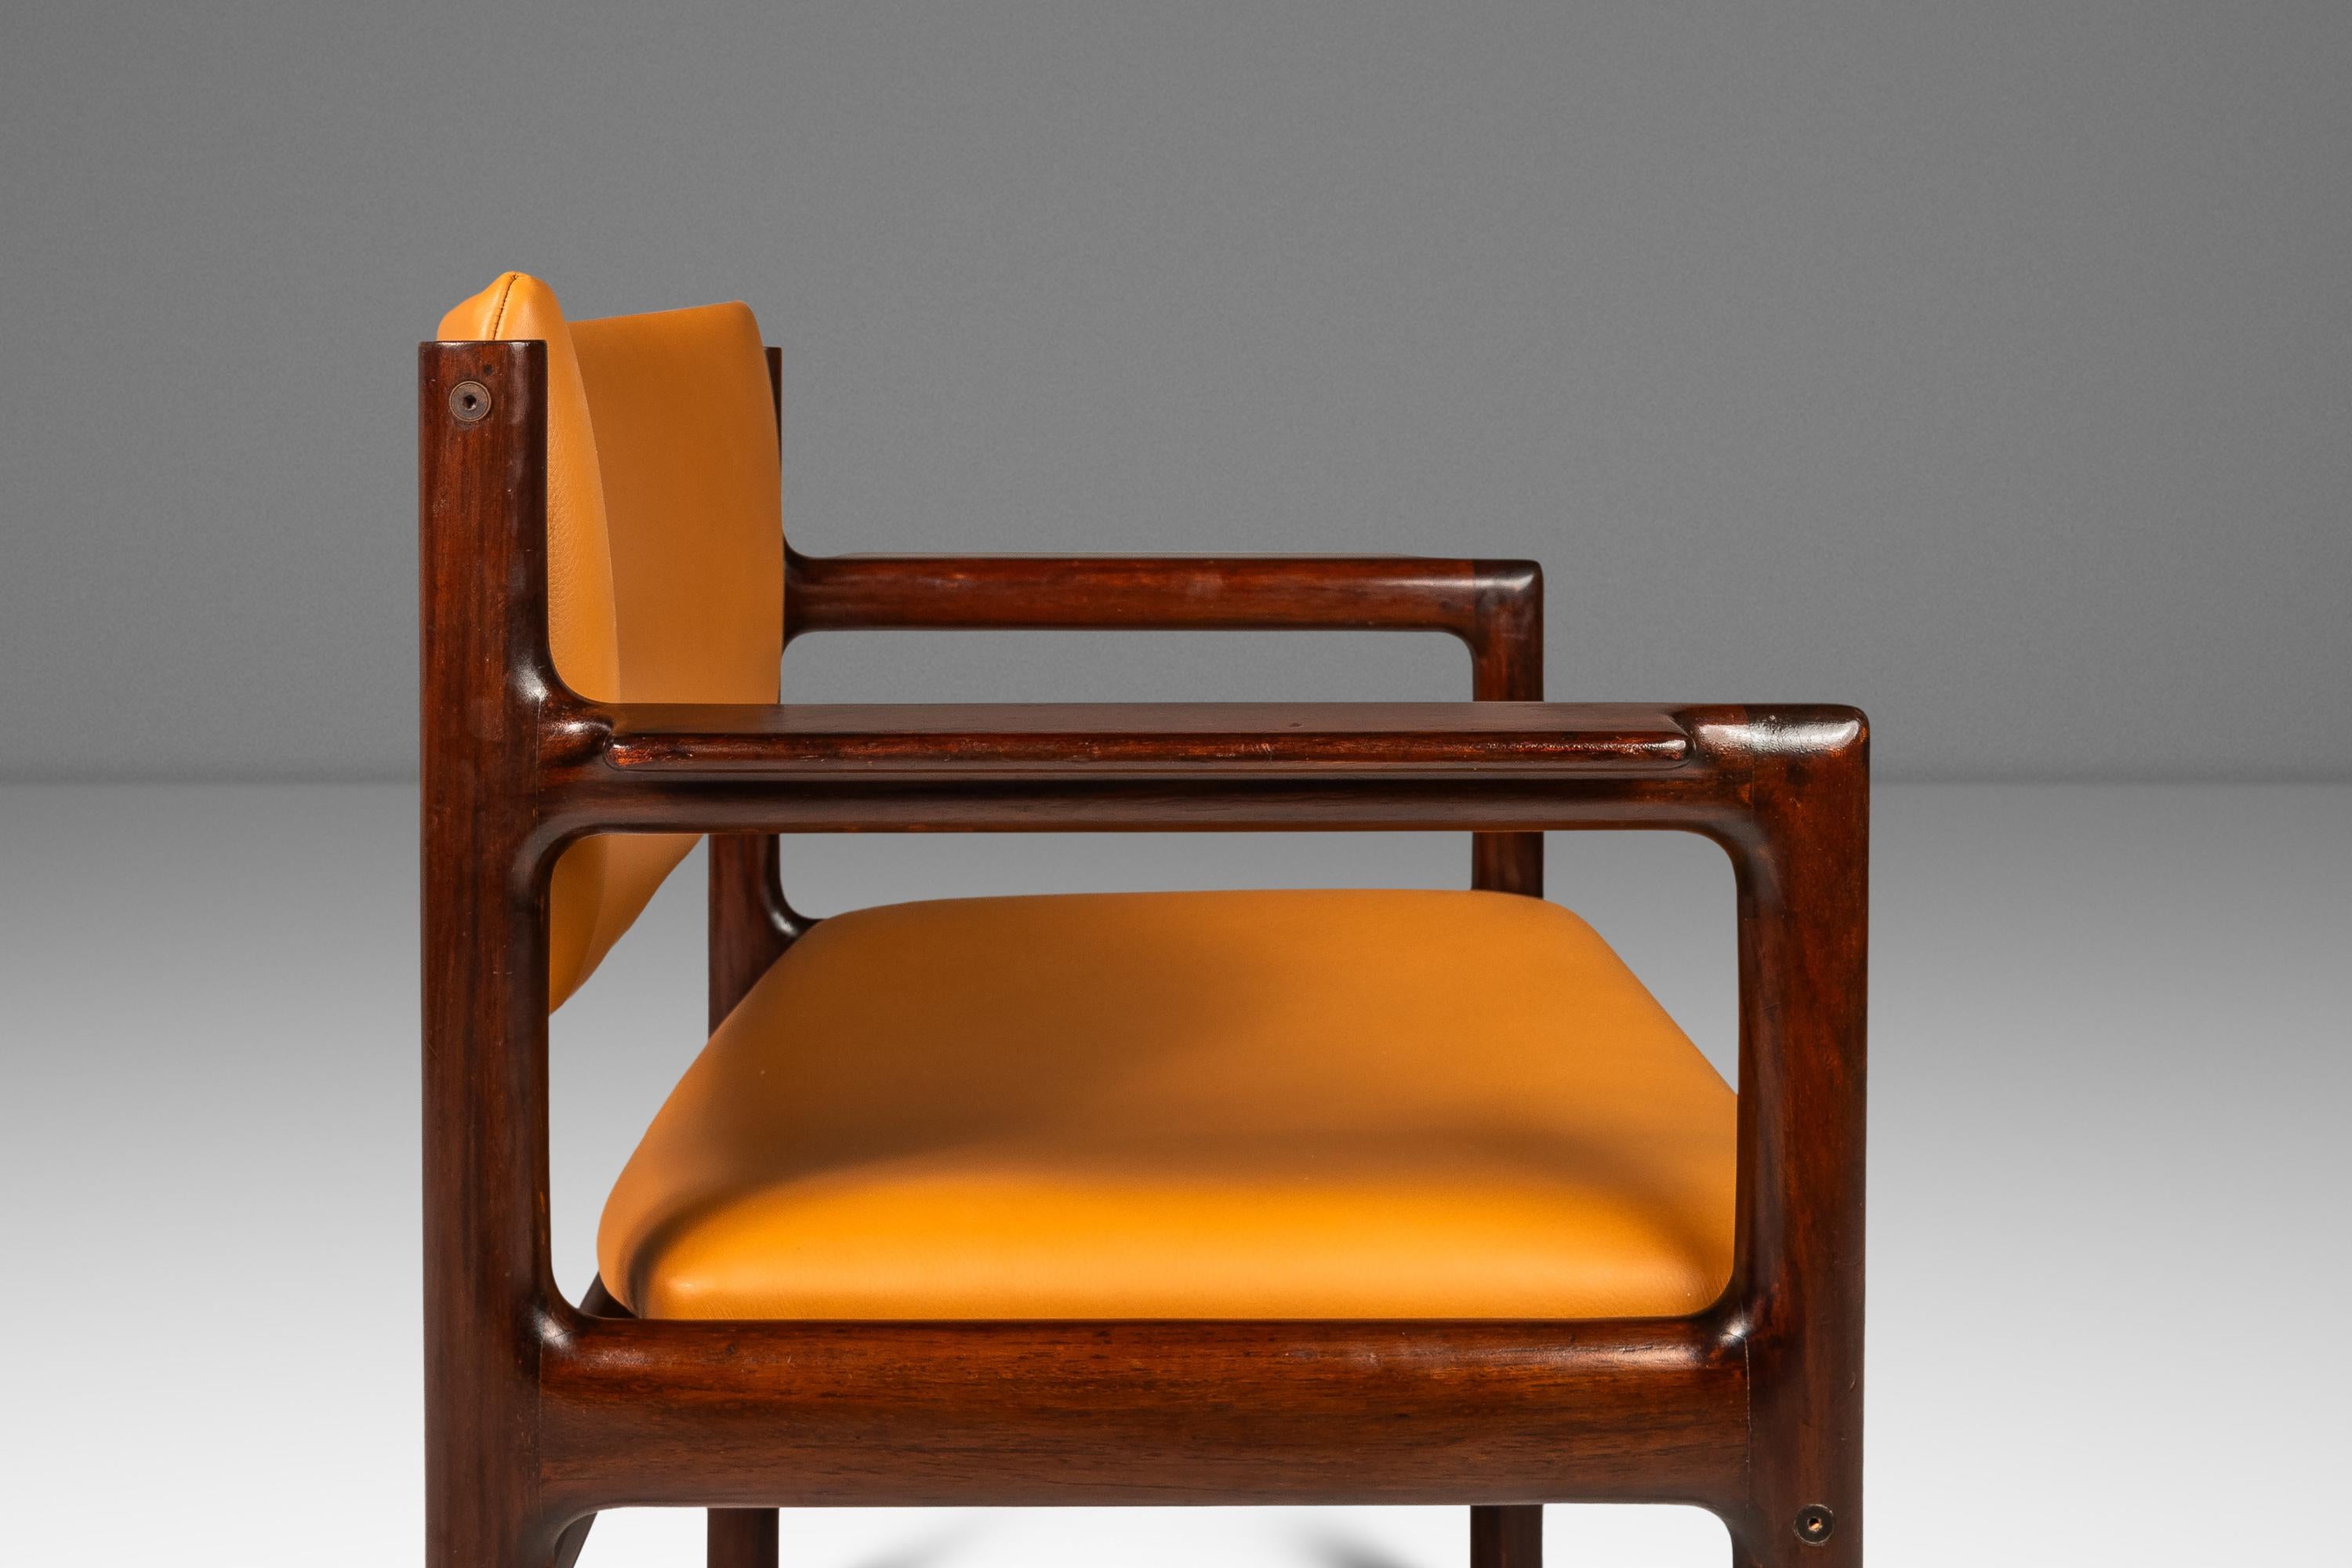 Set of 4 Mahogany Arm Chairs, Caramel Leather by Danish Overseas Imports, 1960's For Sale 10